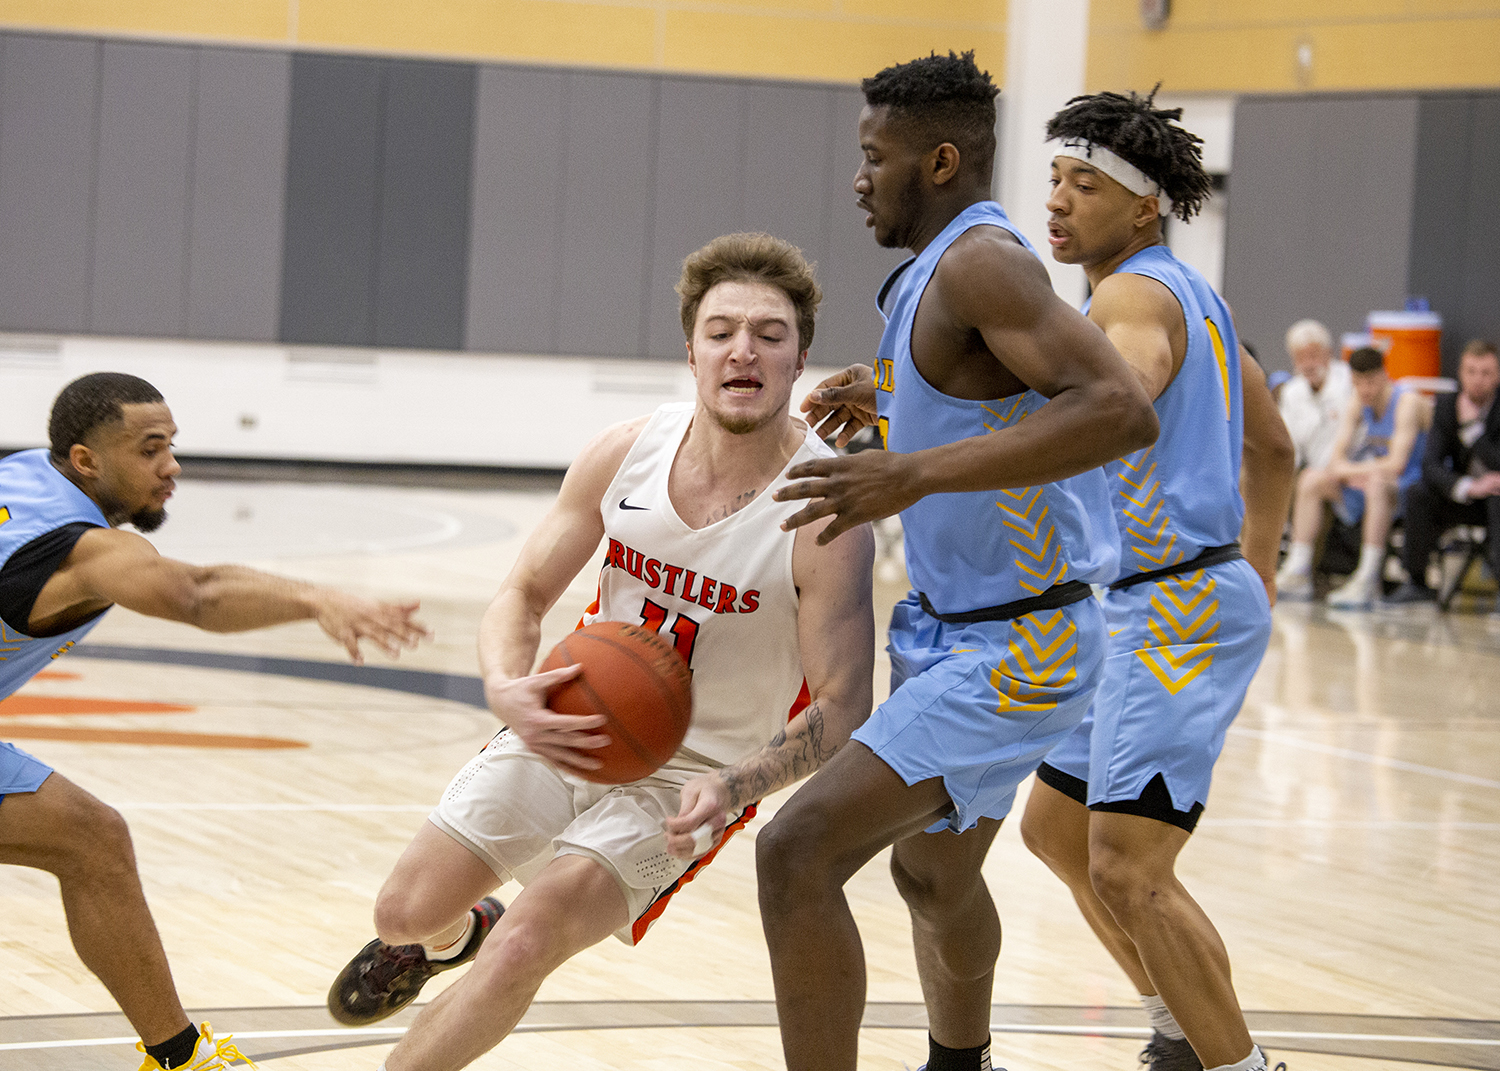 James Woods dribbles the ball around a Sheridan College player